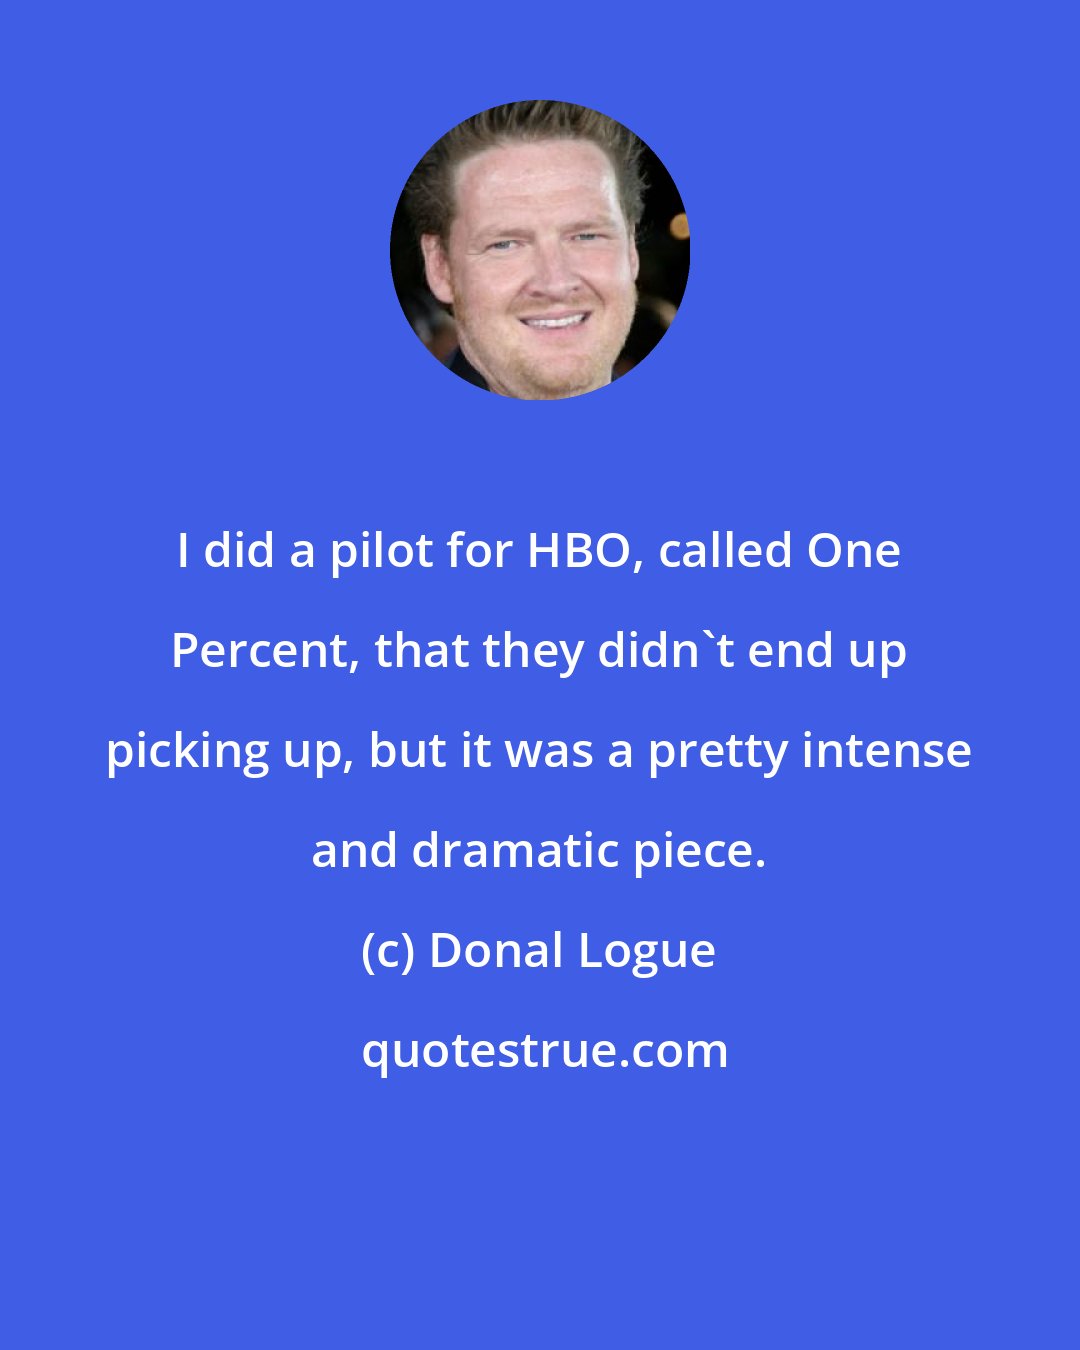 Donal Logue: I did a pilot for HBO, called One Percent, that they didn't end up picking up, but it was a pretty intense and dramatic piece.